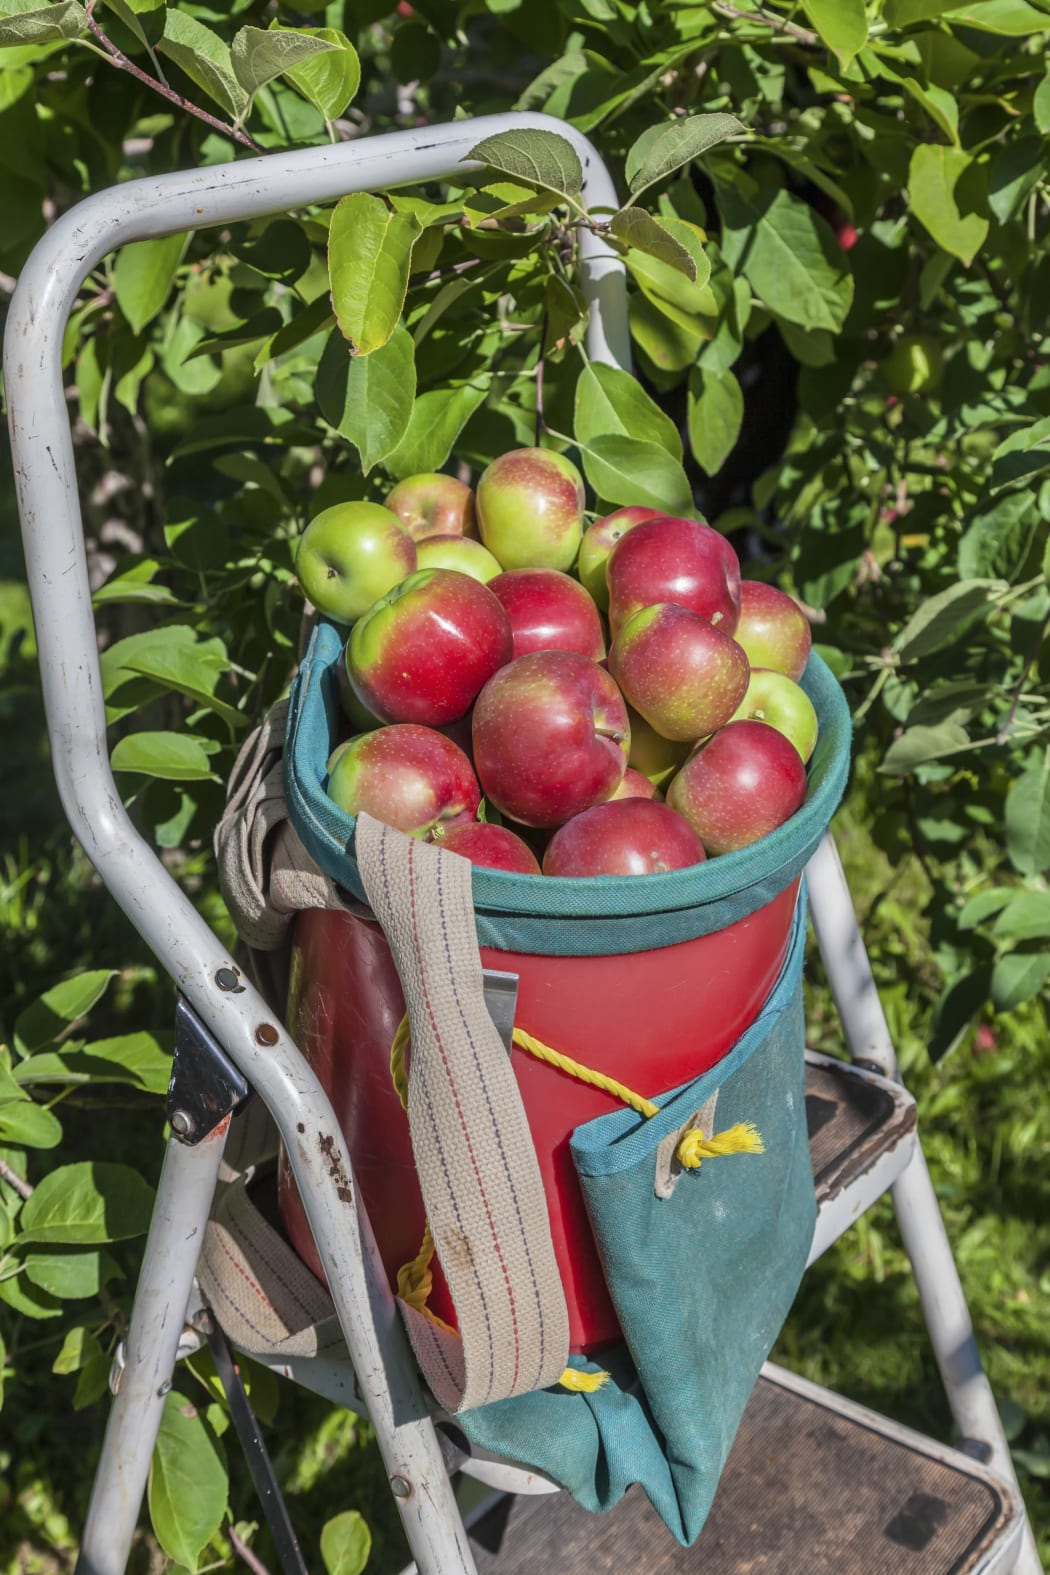 A commercial apple picking basket with ladder in orchard.